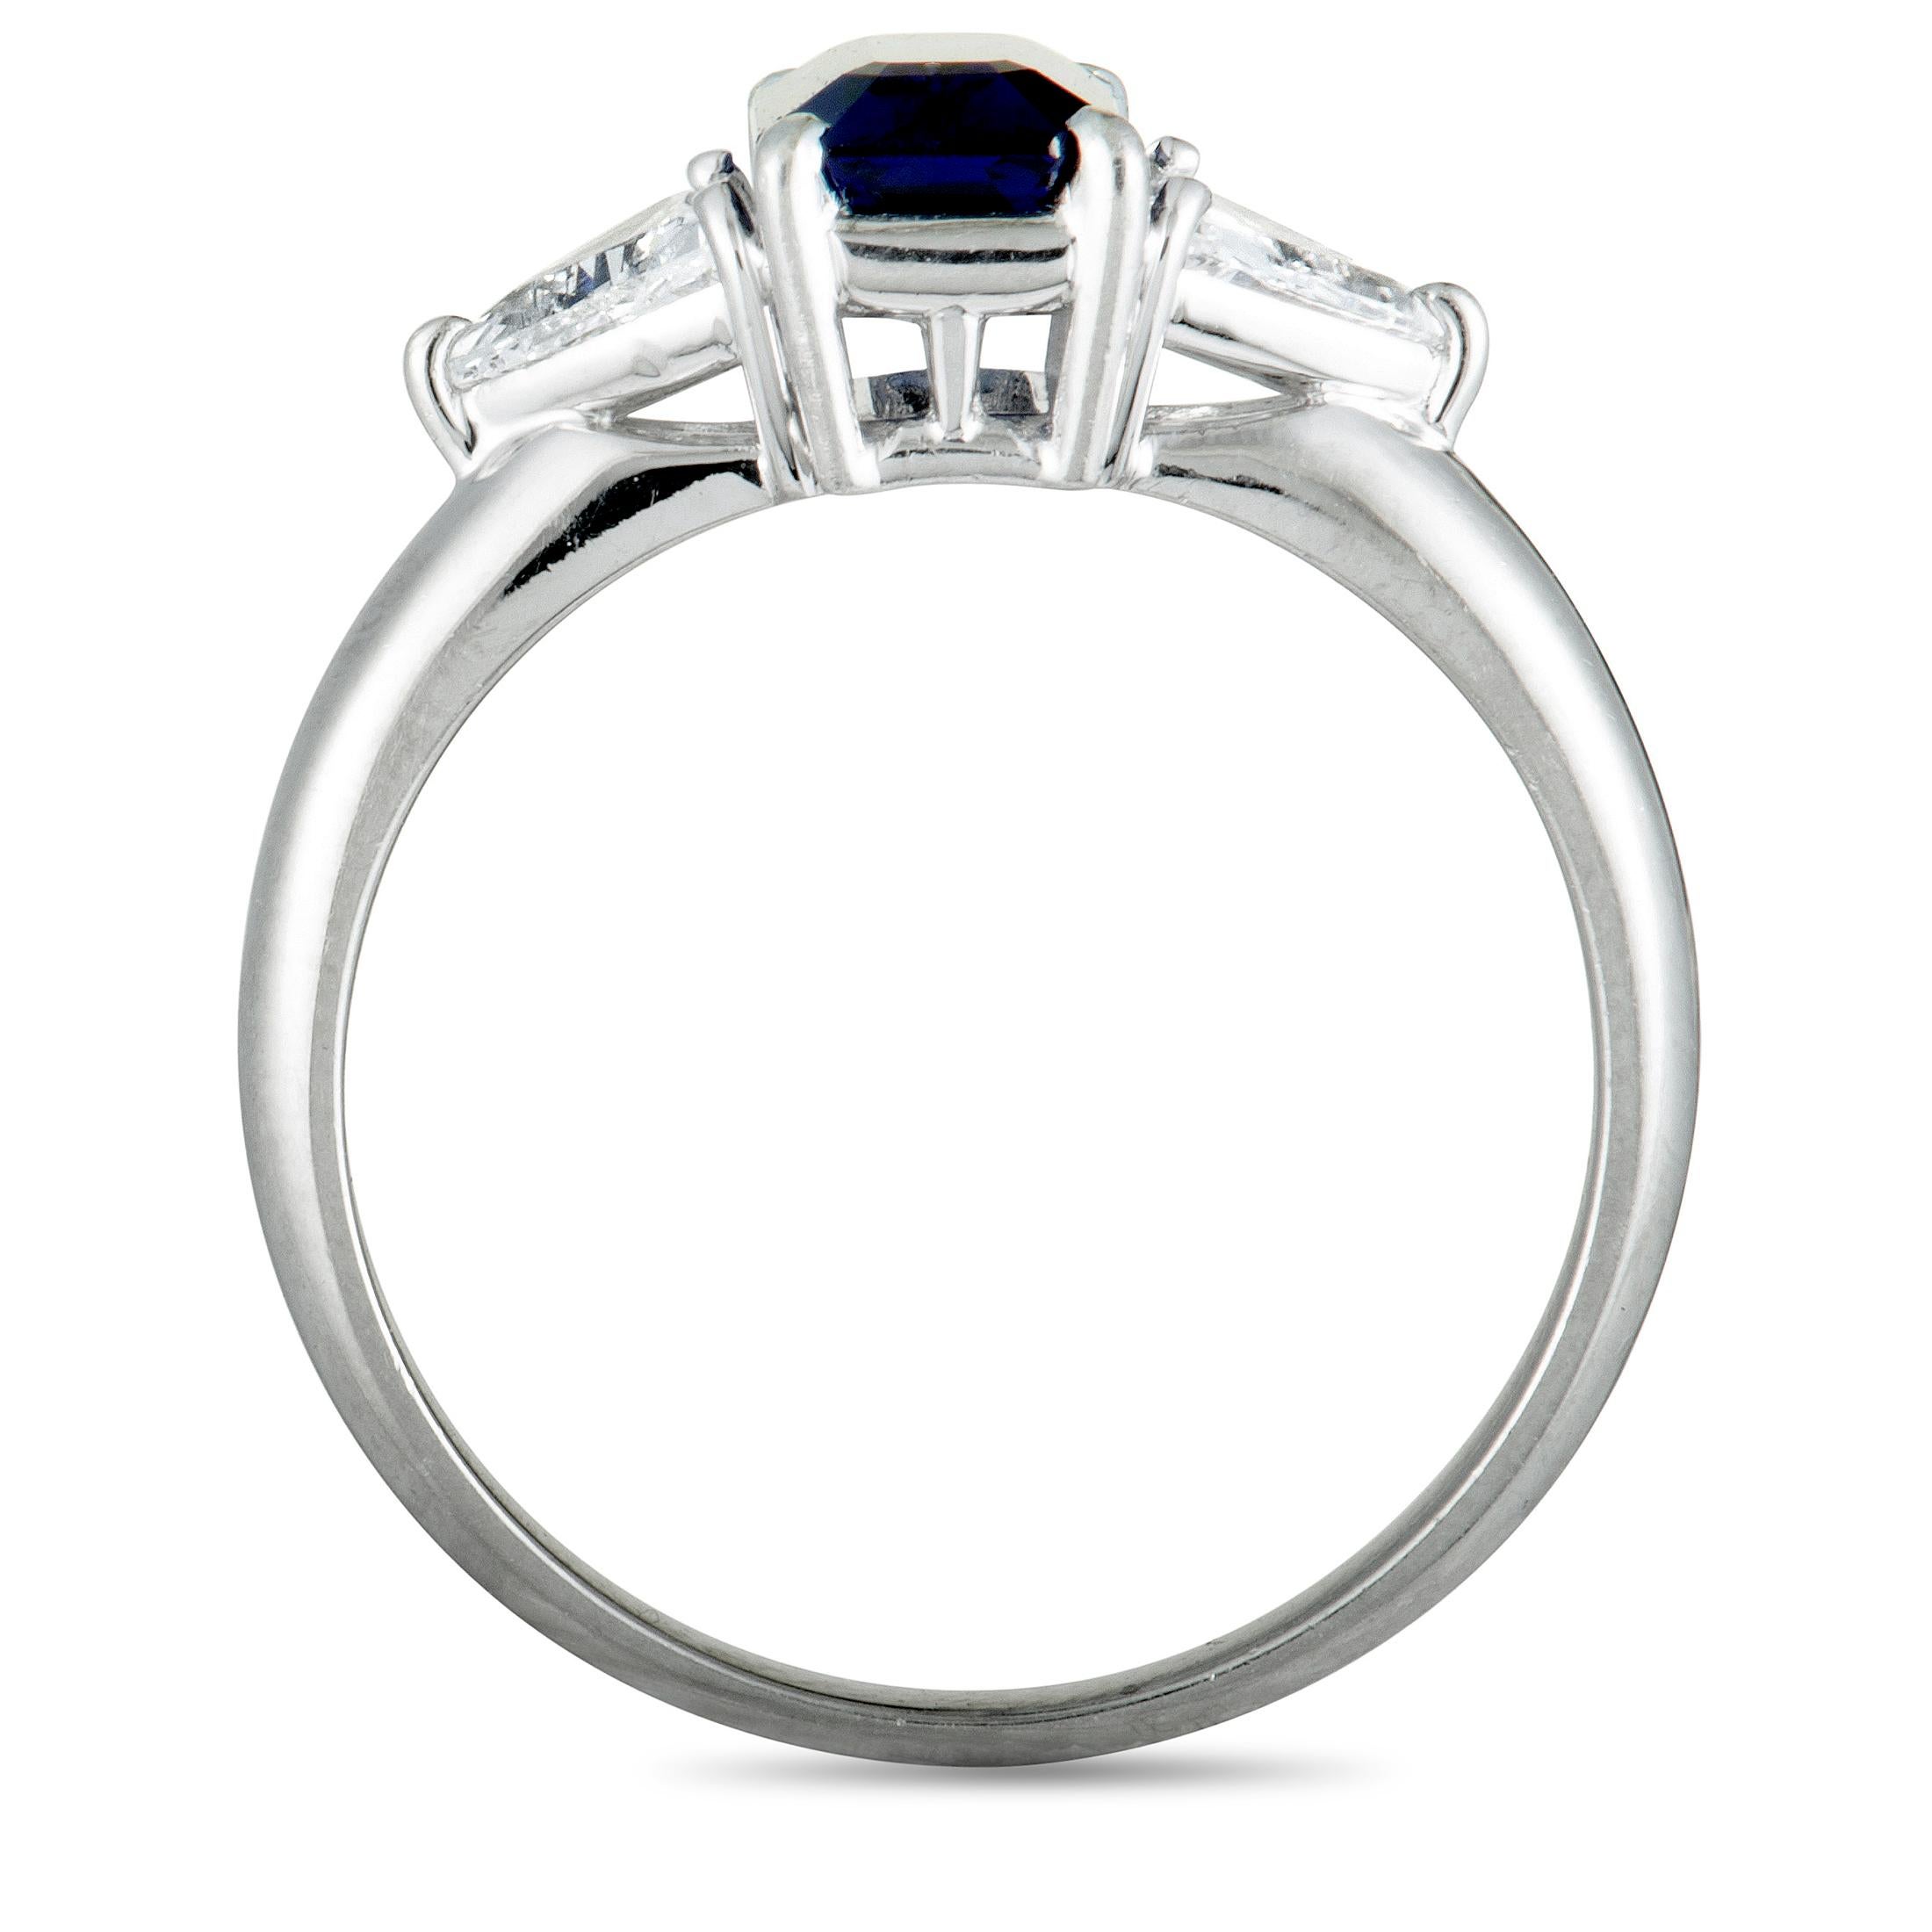 Producing an exceptionally tasteful and charmingly resplendent allure with the splendid sapphire weighing 0.53 carats and the mesmerizing diamonds amounting to 1.65 carats, this marvelous platinum ring offers a truly gorgeous sight.
Ring Size: